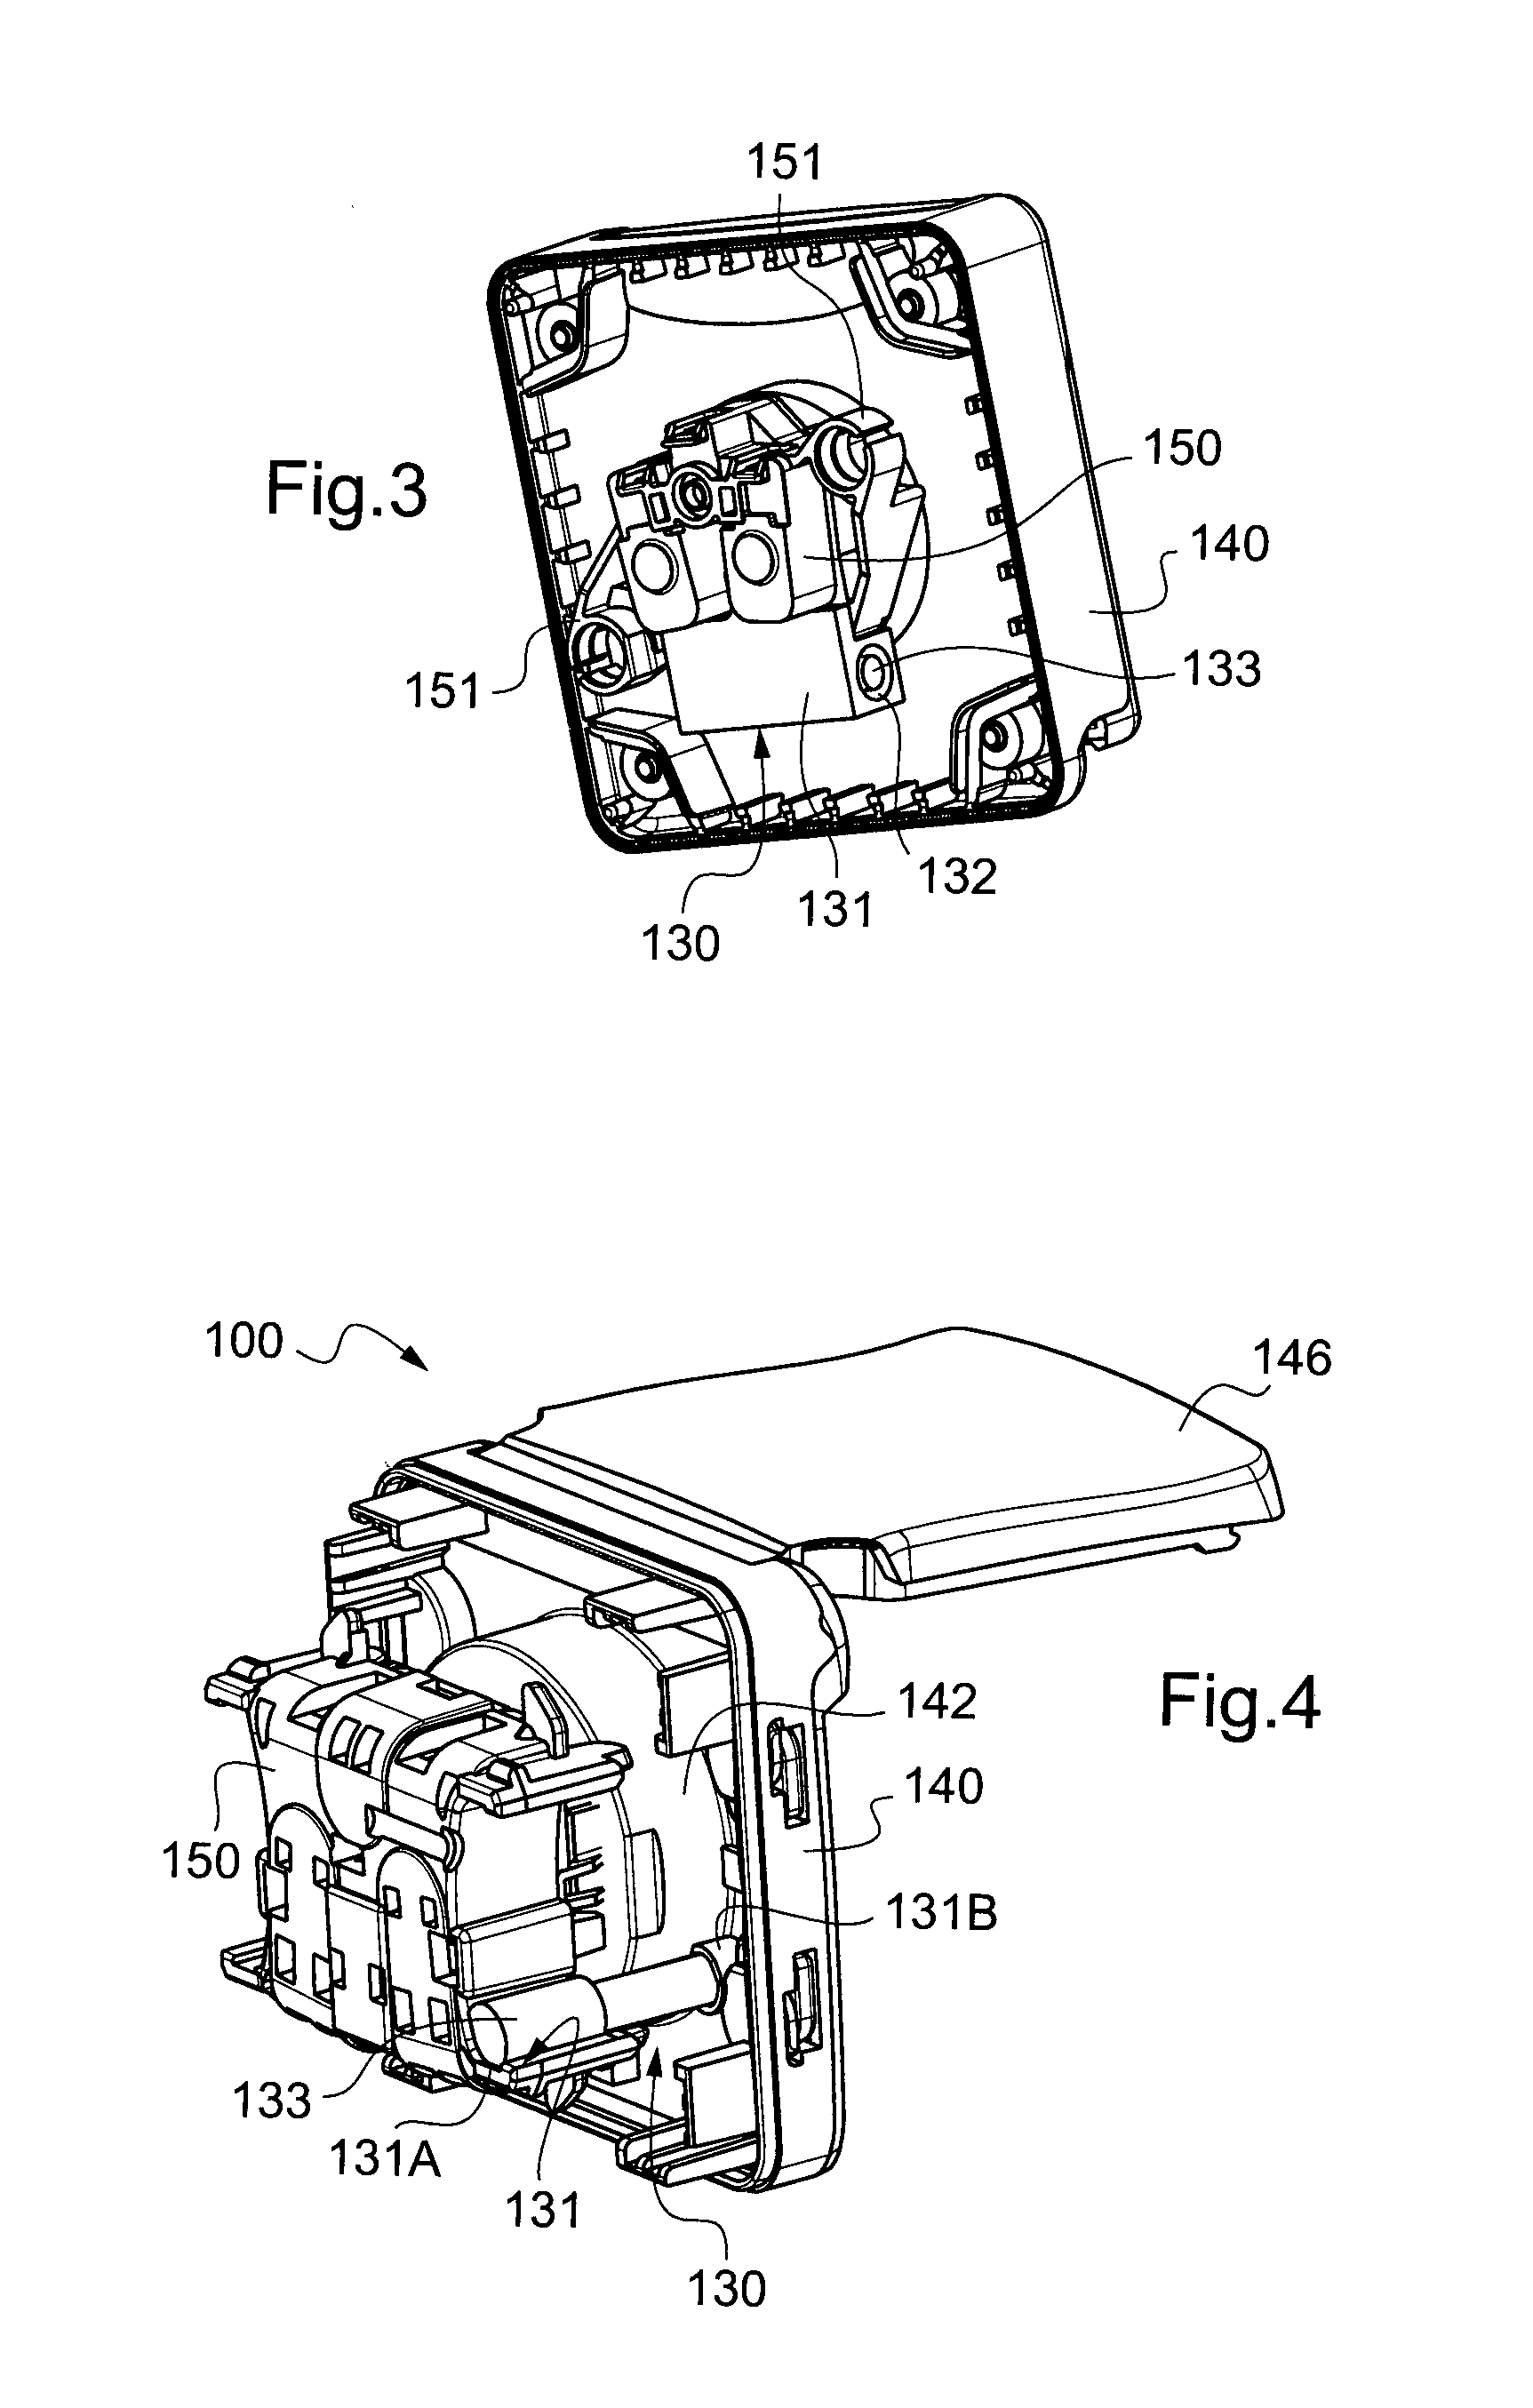 Electrical plug and associated electrical assembly